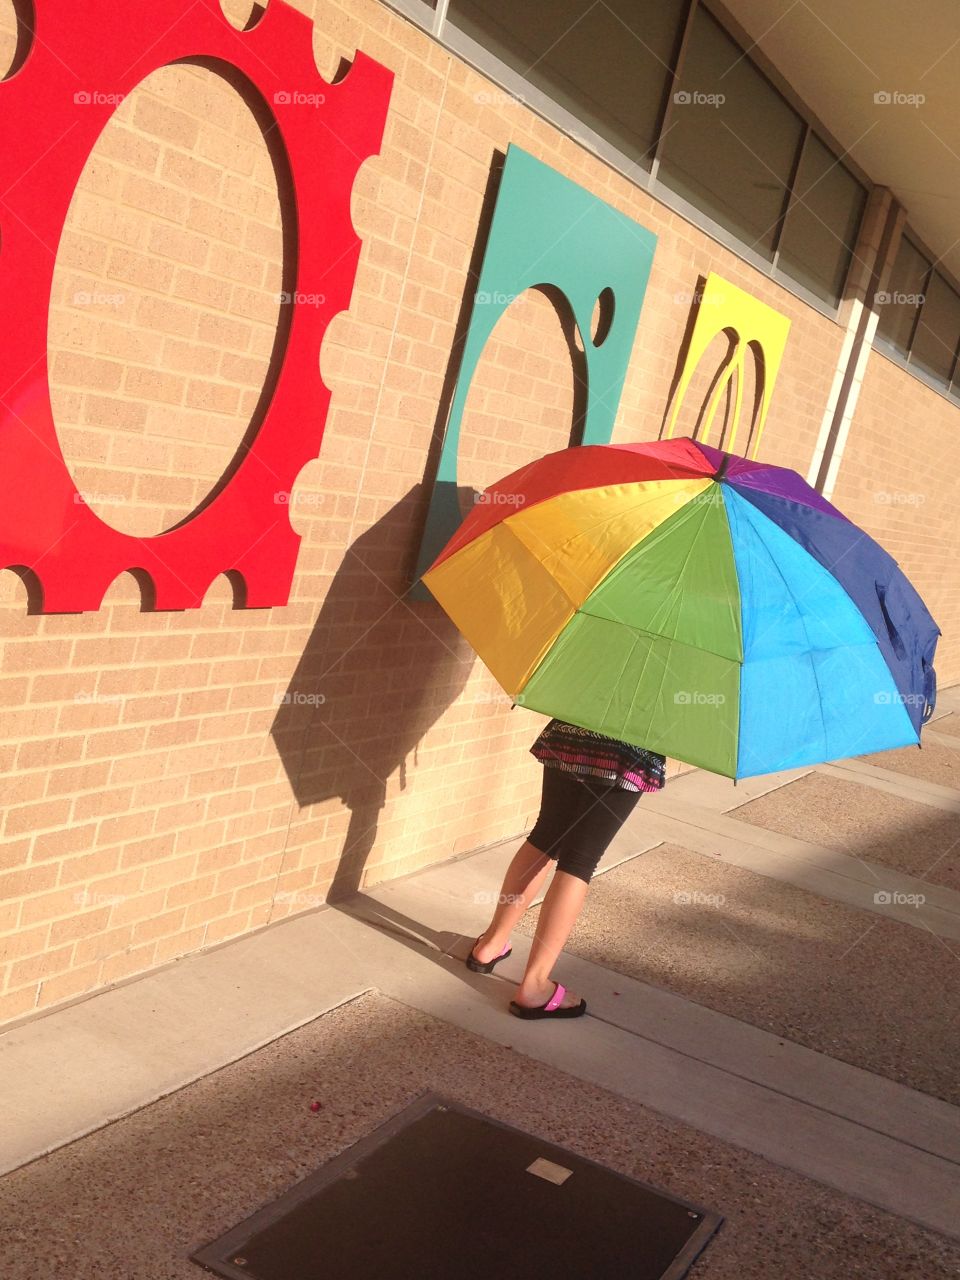 Fun with colors. Girl under rainbow umbrella next to colorful art 